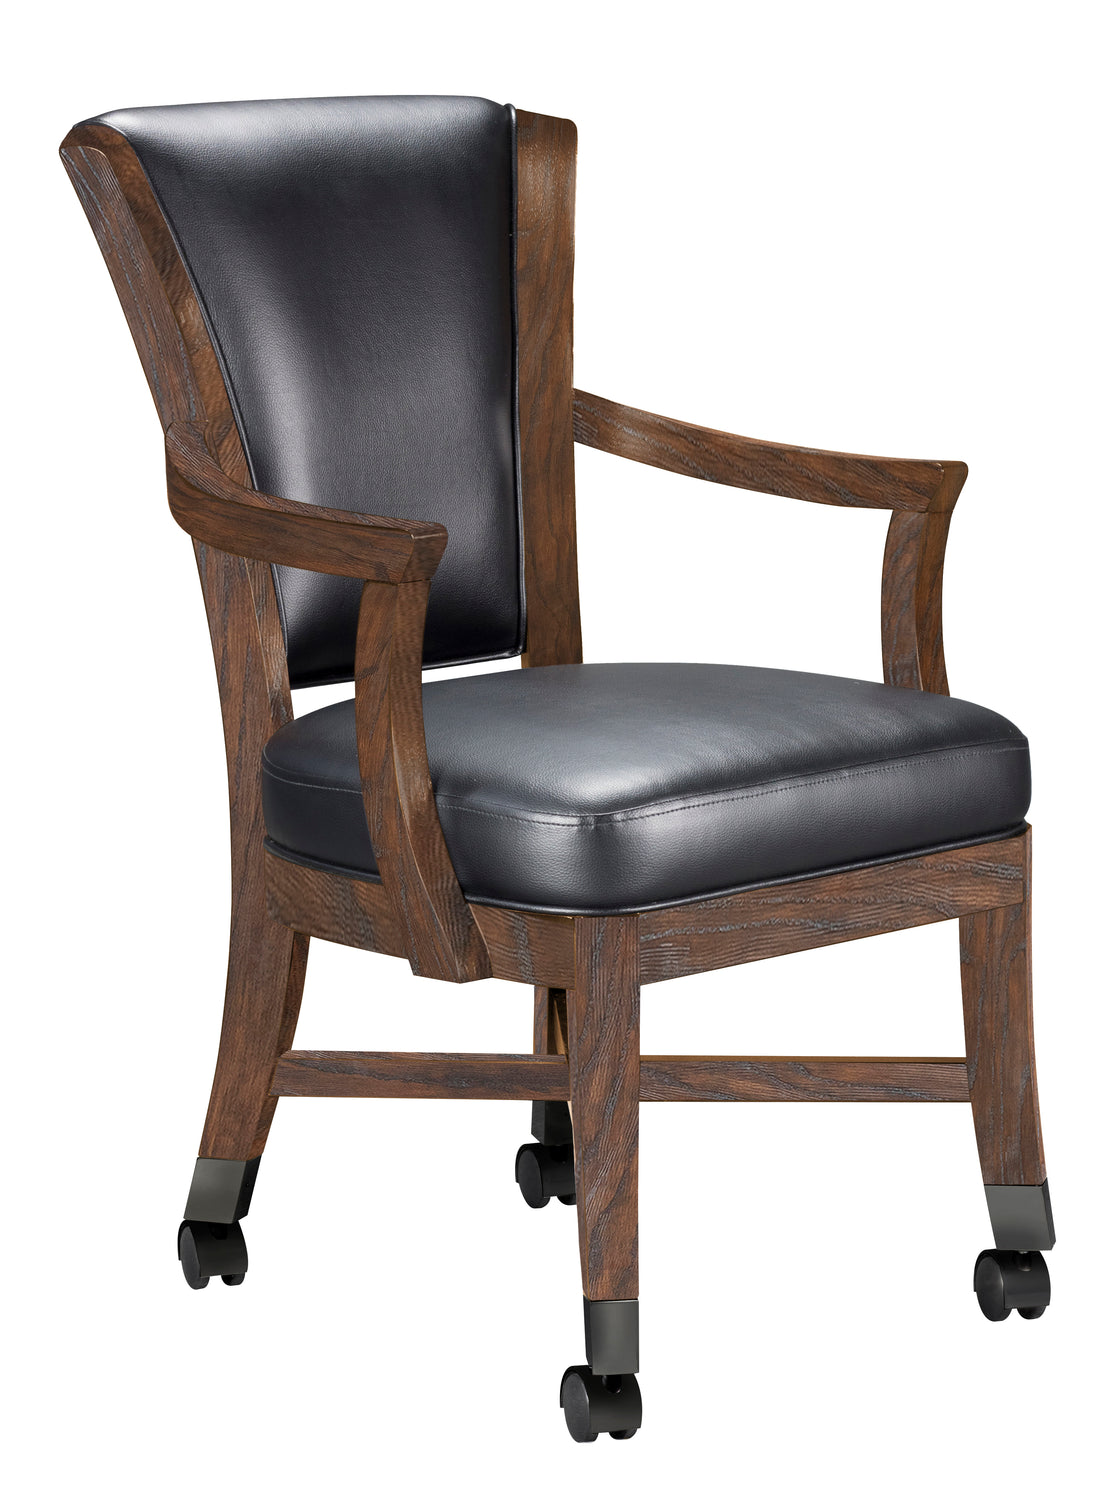 Legacy Billiards Elite Caster Game Chair in Whiskey Barrel Finish - Primary Image